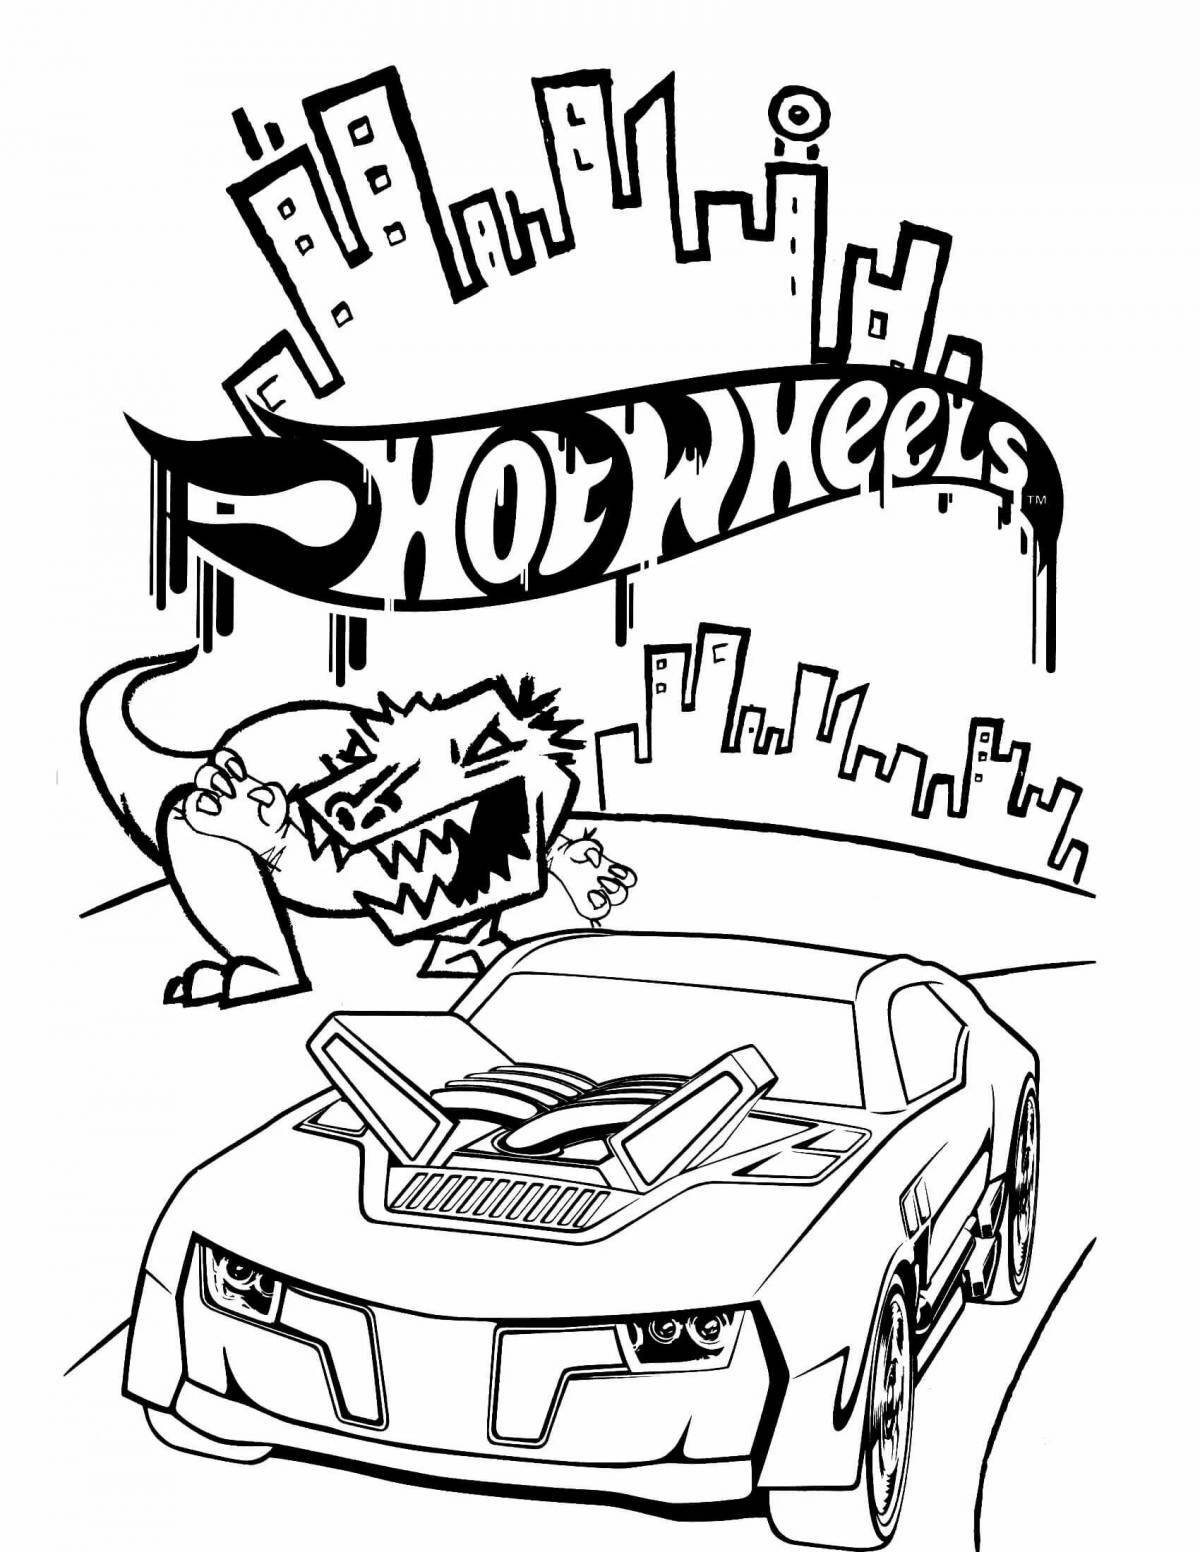 Coloring page wonderful track hot wheels